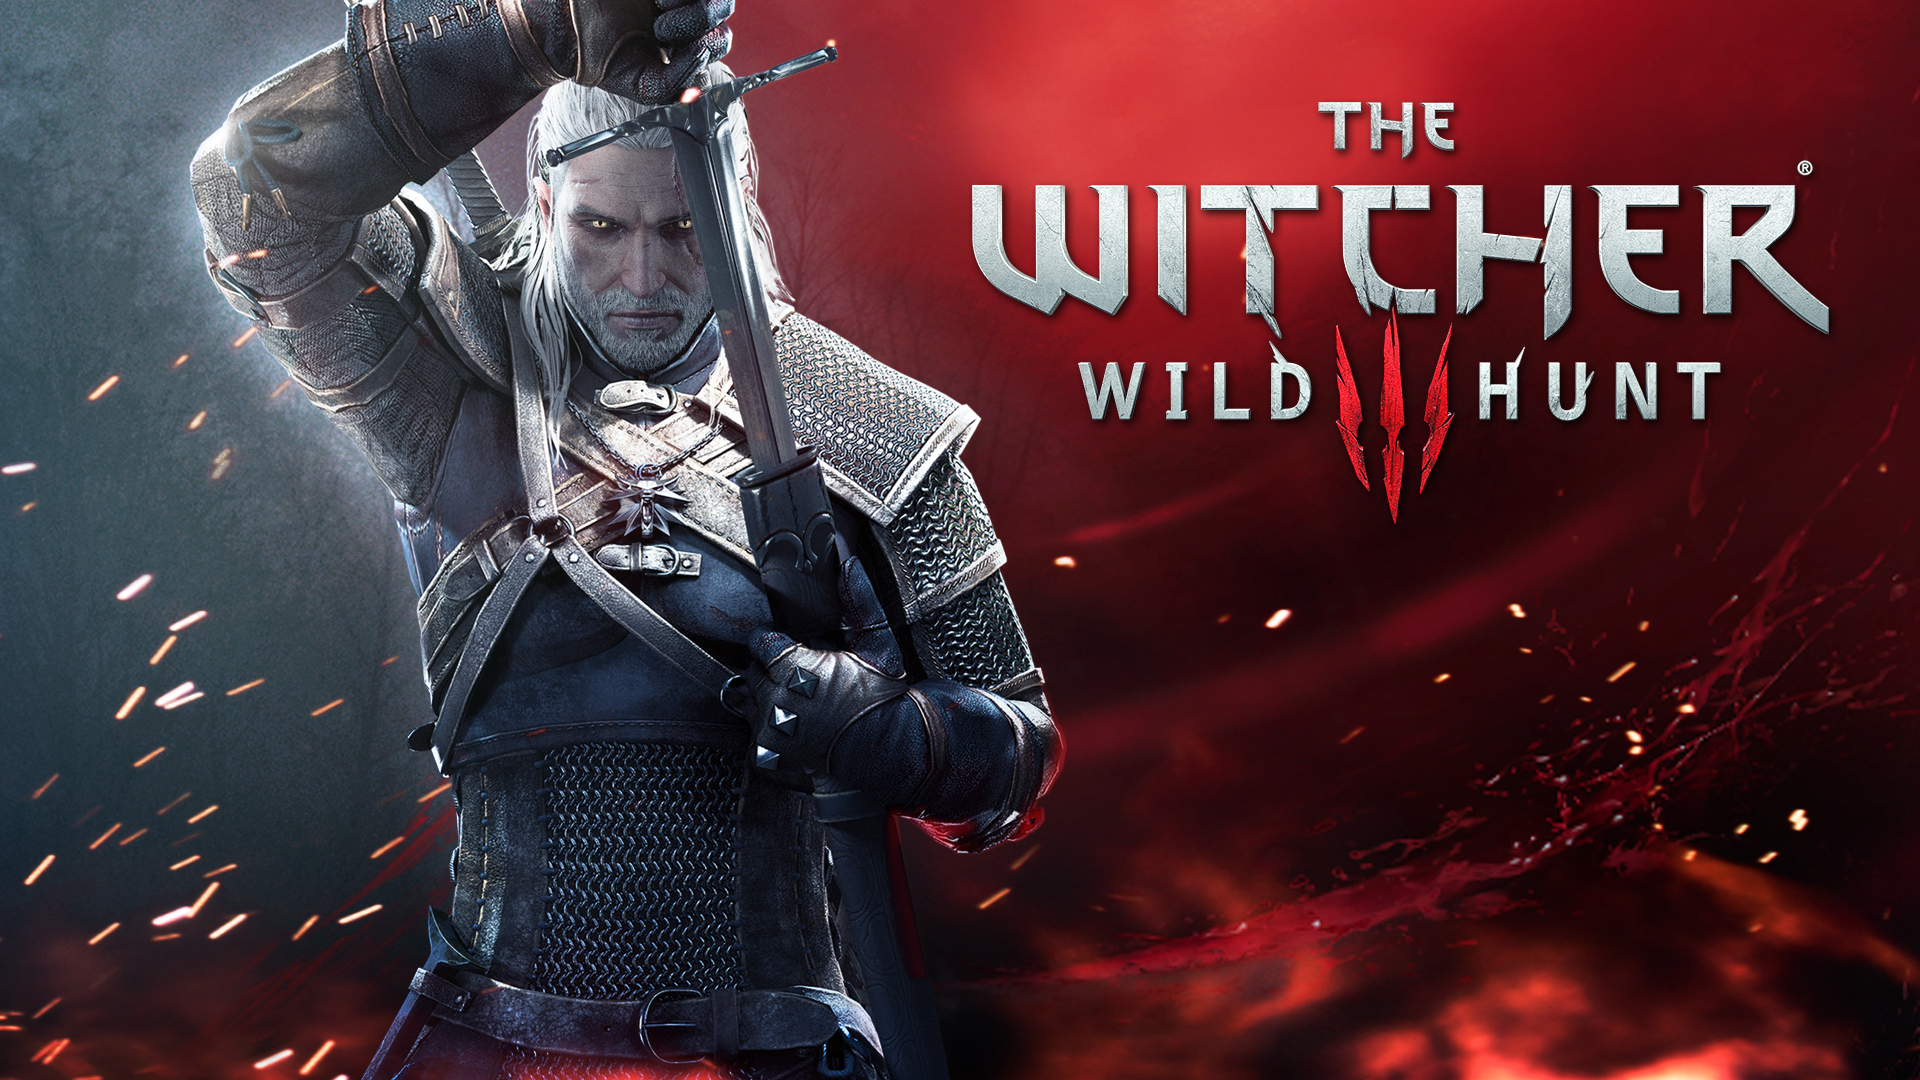 “The Witcher 3: Wild Hunt” Launch Cinematic - The Anticipation is Real.